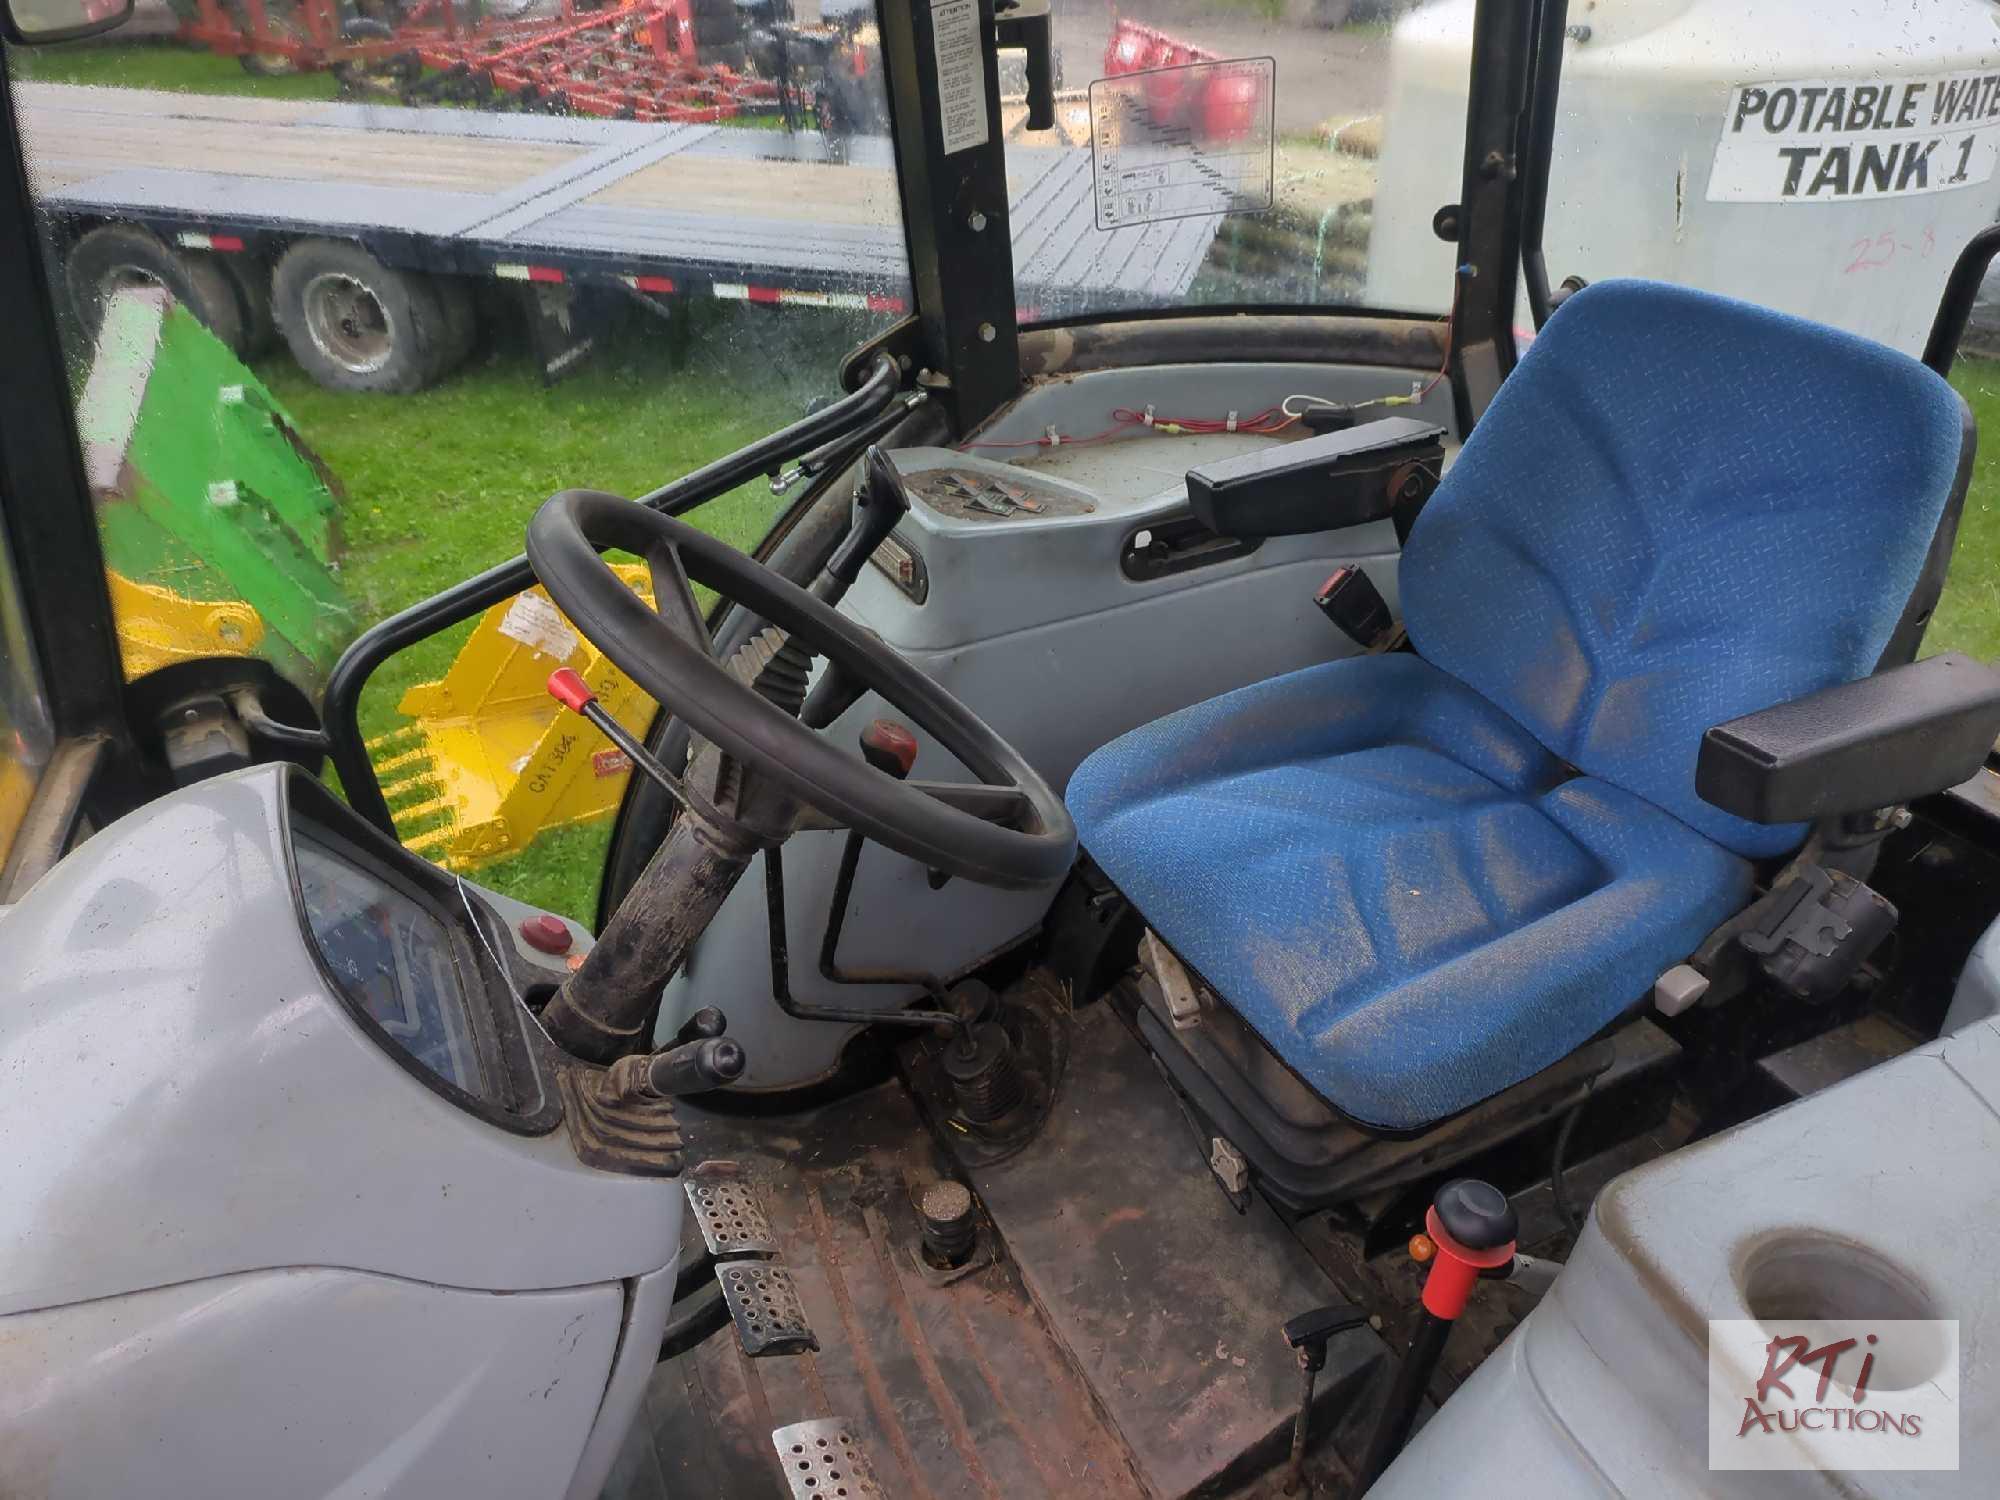 New Holland TD5050 tractor with loader, bucket, cab, lift arms, draw bar, PTO, 2 remotes, 4WD,